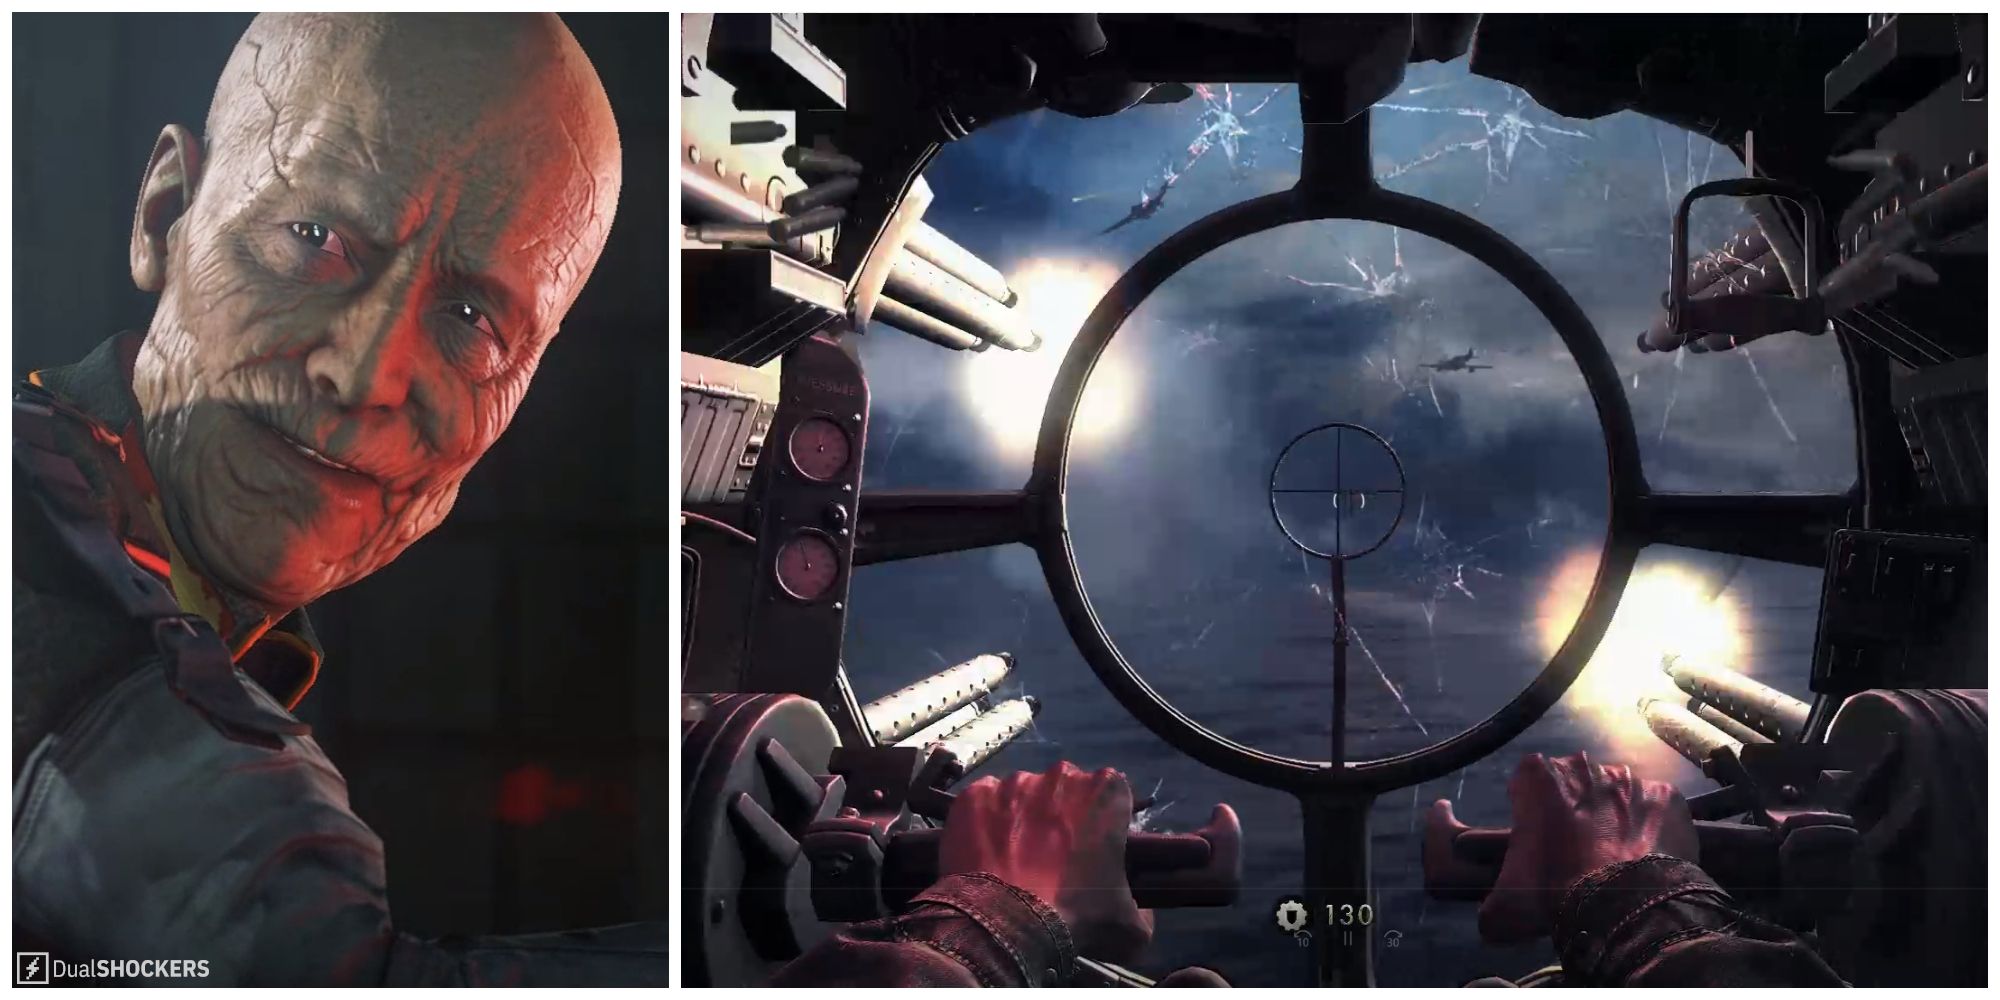 Split image of the character Deathshead and Blazkowicz in the cockpit in Wolfenstein: The New Order.